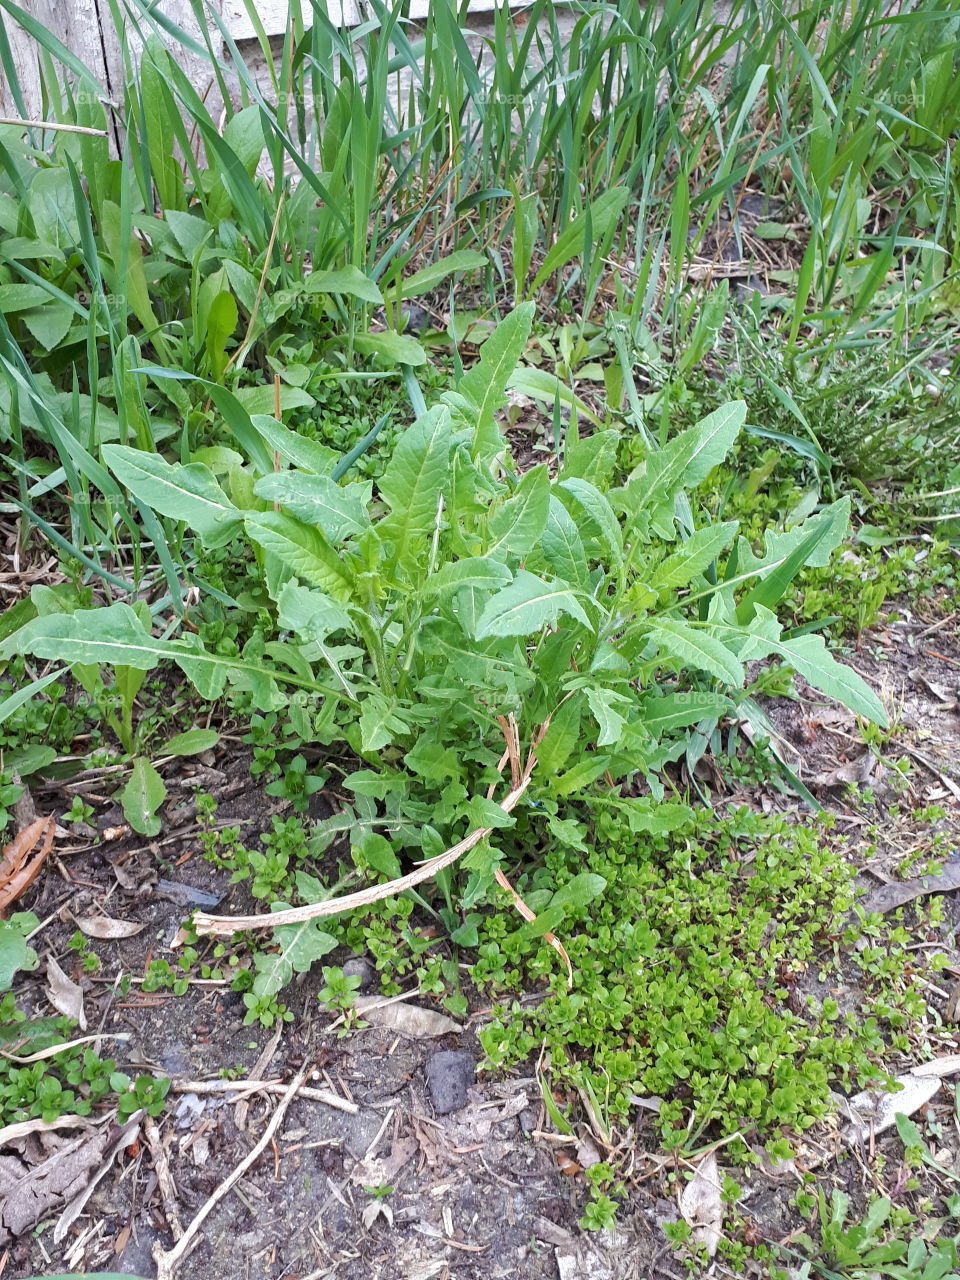 Dandelion plant without flowers